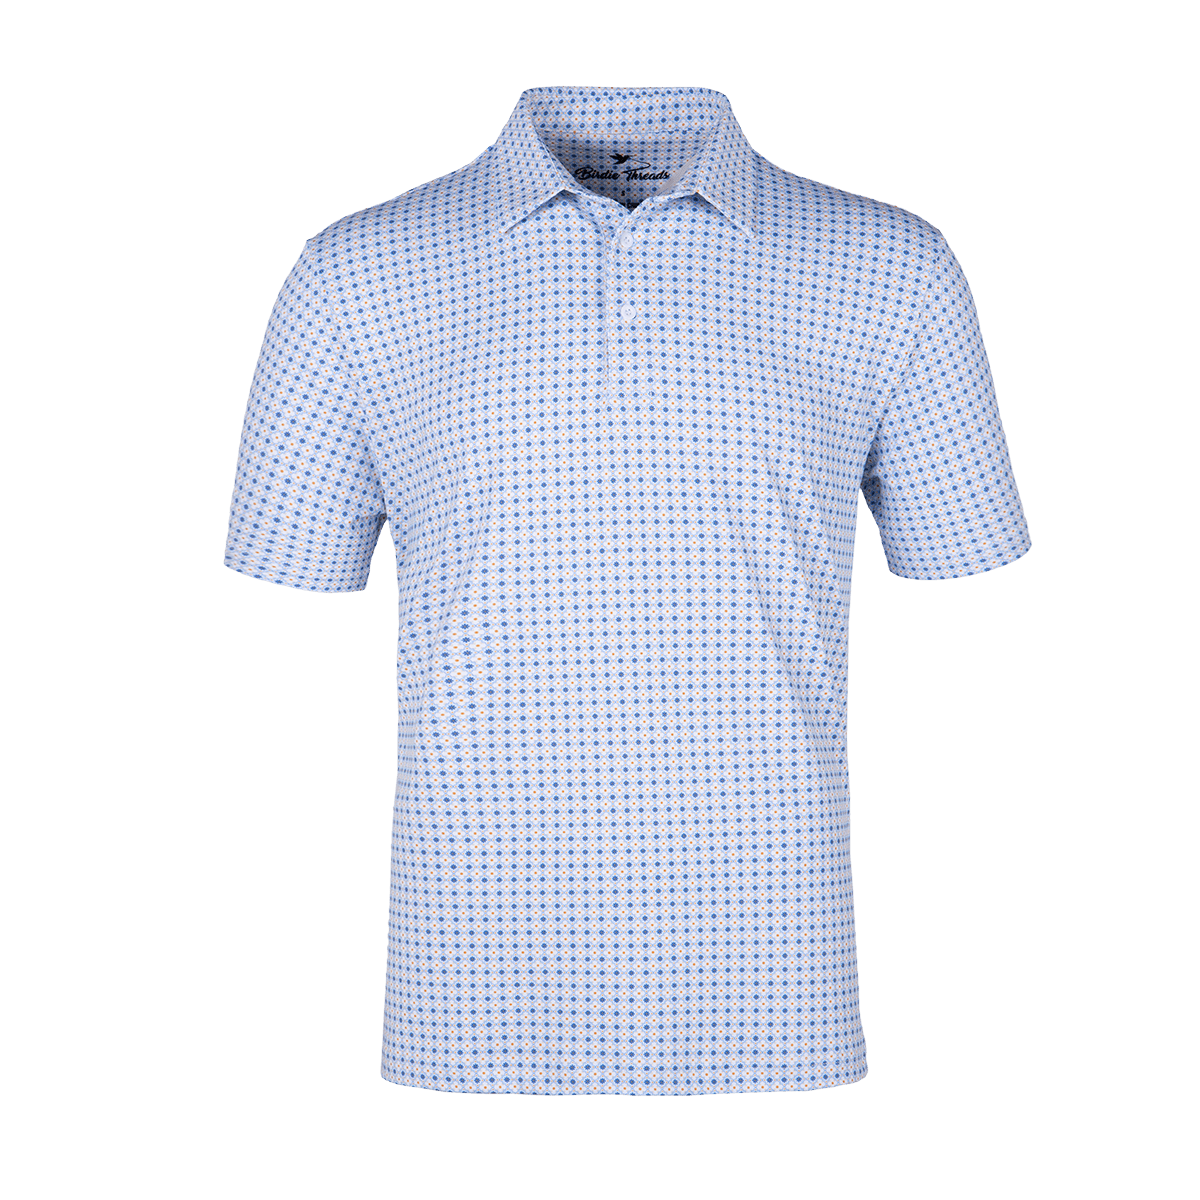 The Azulejo polo shirt from Birdie Threads is crafted with attention to detail, featuring a classic polo collar and a button-down front for a timeless look. The intricate azulejo tile pattern is printed all over the shirt, creating a bold and statement-making design.